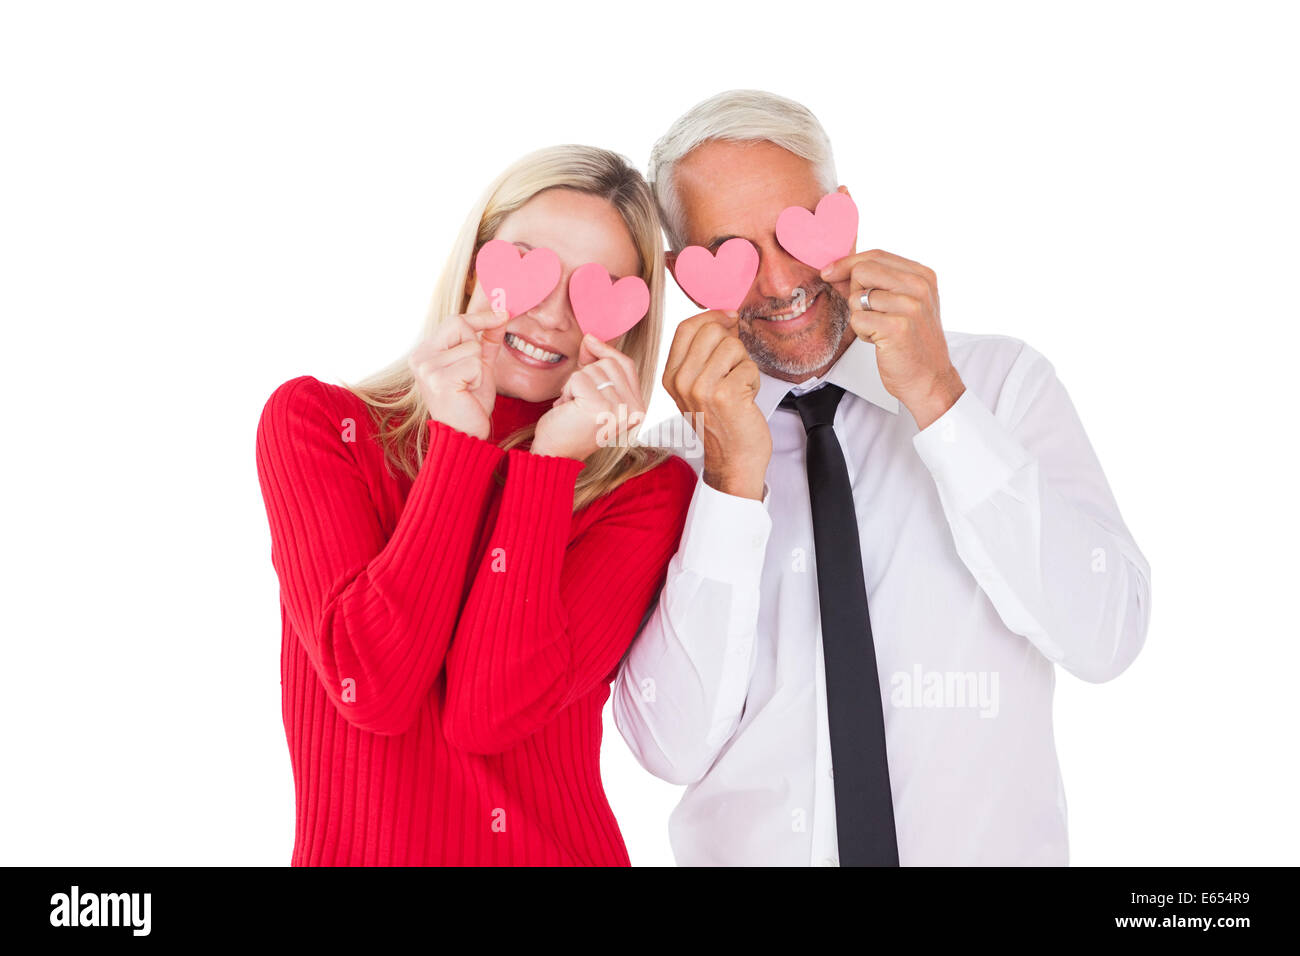 Silly couple holding hearts over their eyes Stock Photo